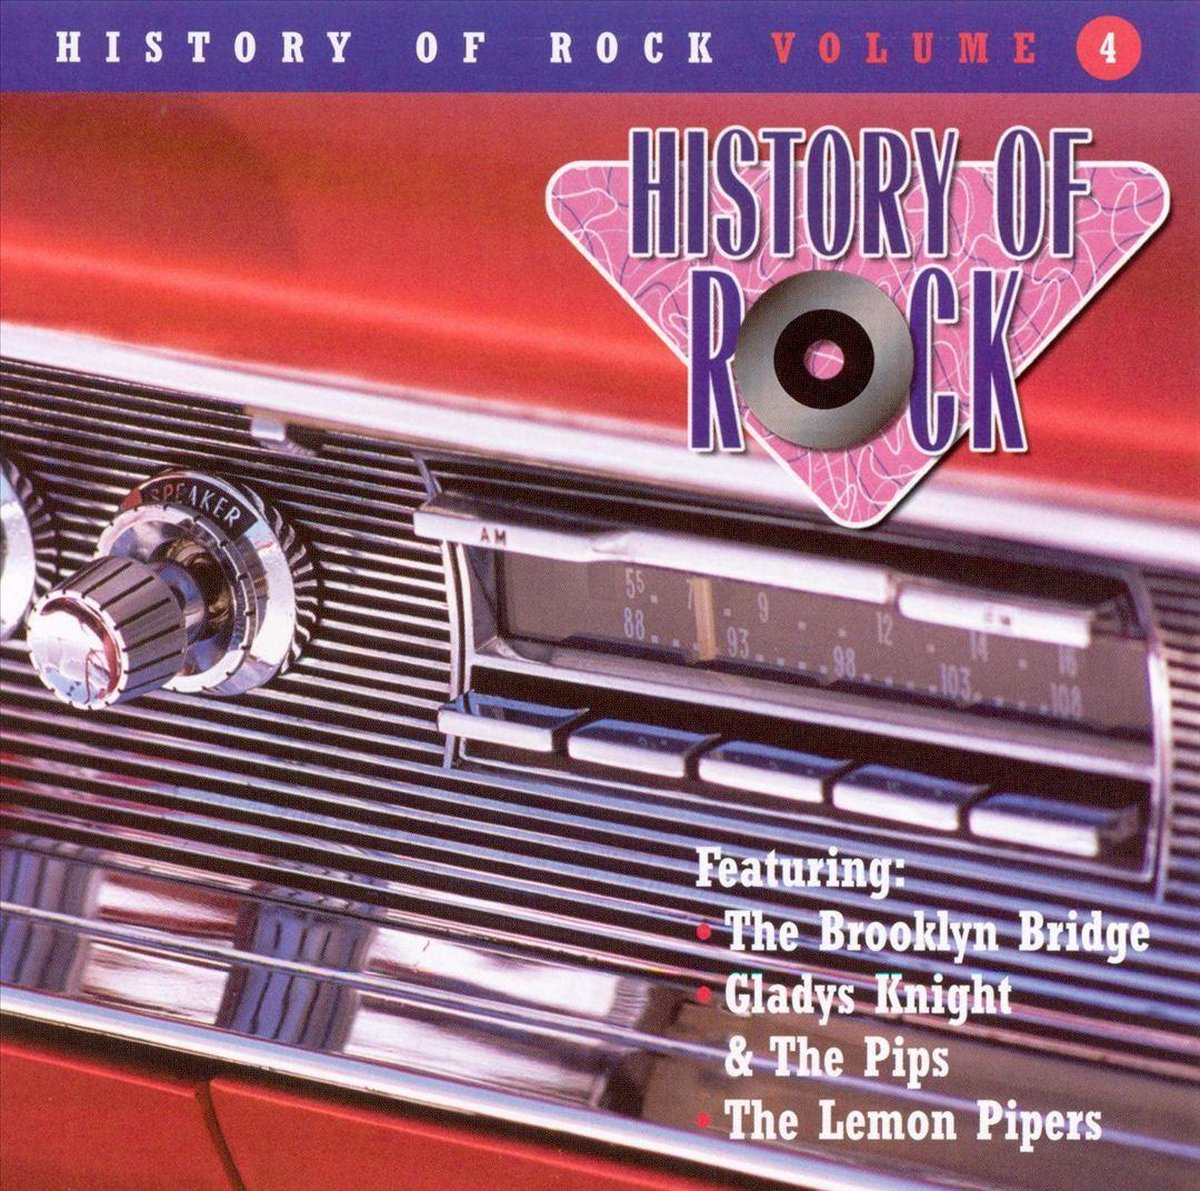 The History Of Rock Vol. 4 - various artists